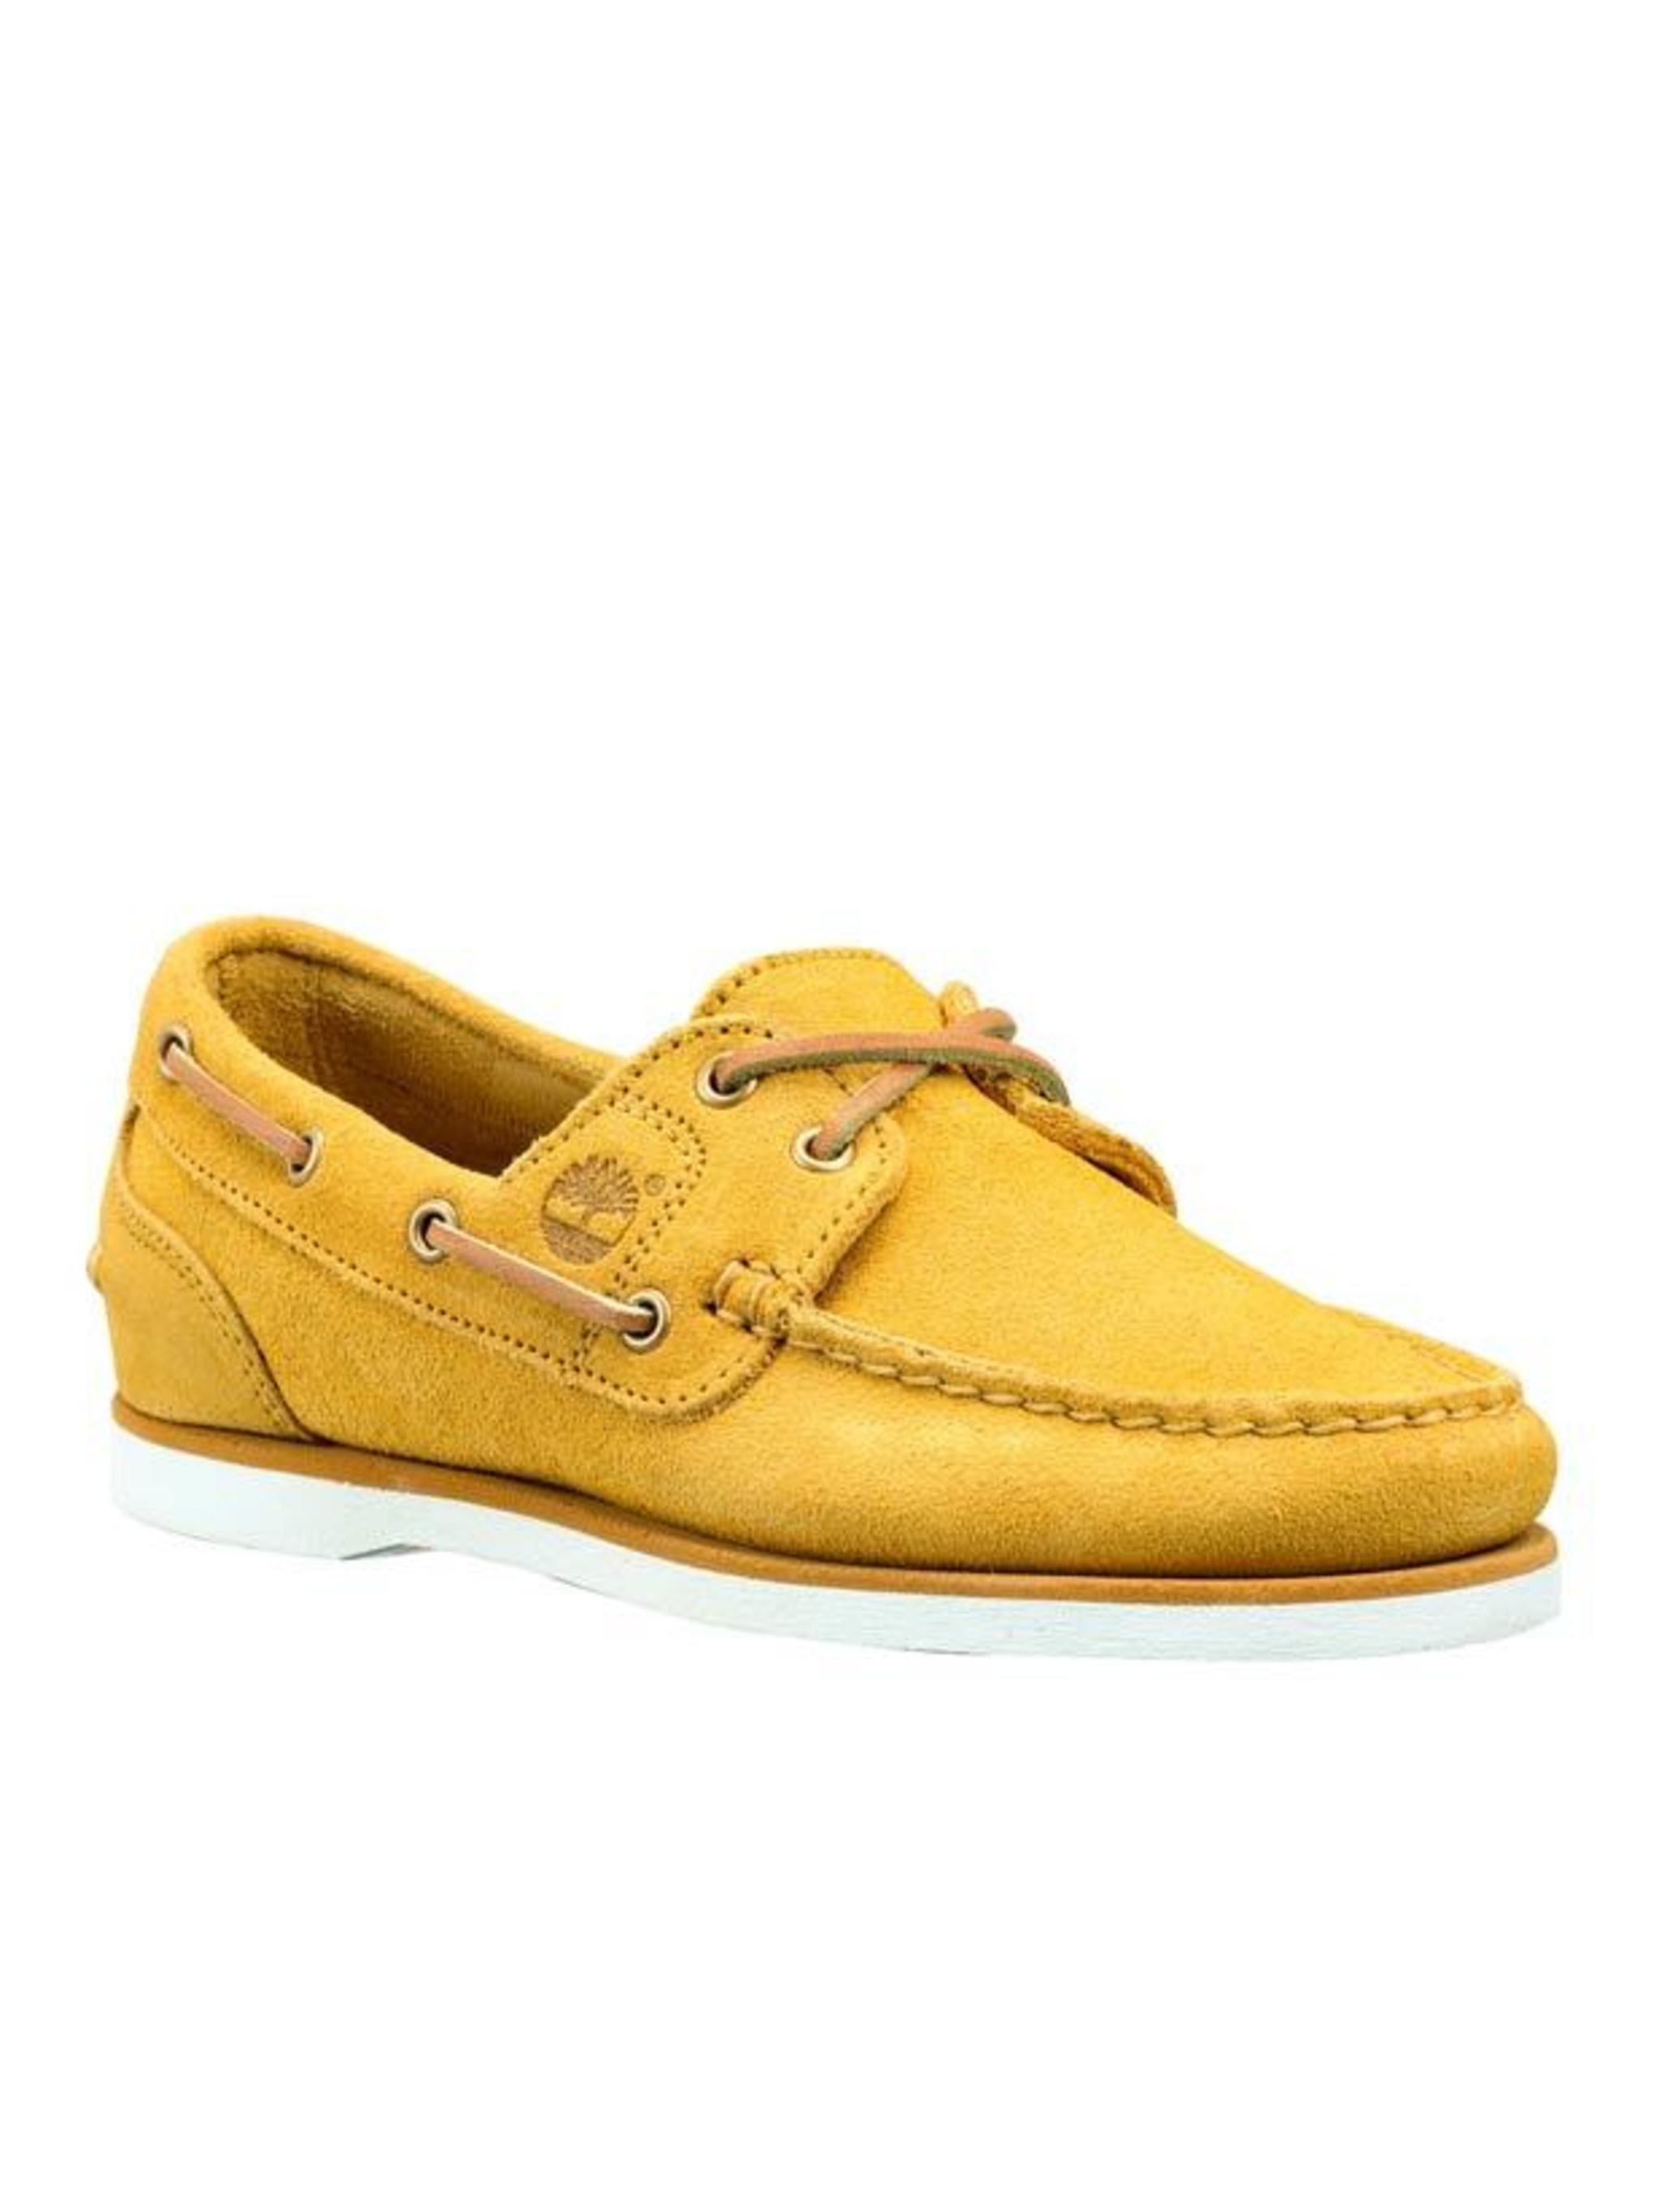 yellow boat shoes for women